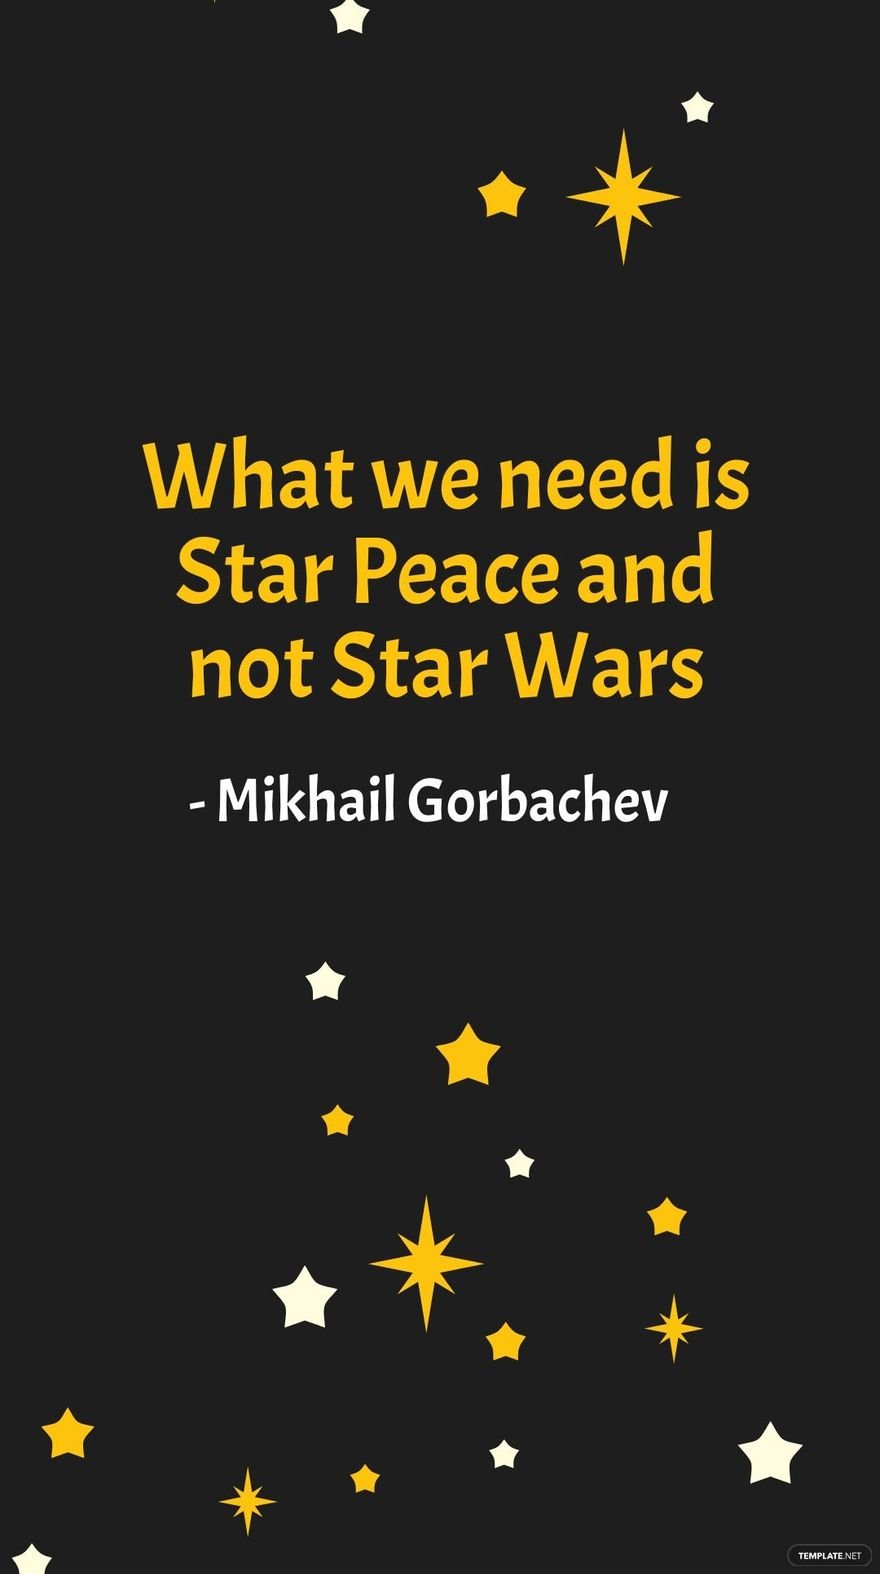 Free Mikhail Gorbachev - What we need is Star Peace and not Star Wars in JPG